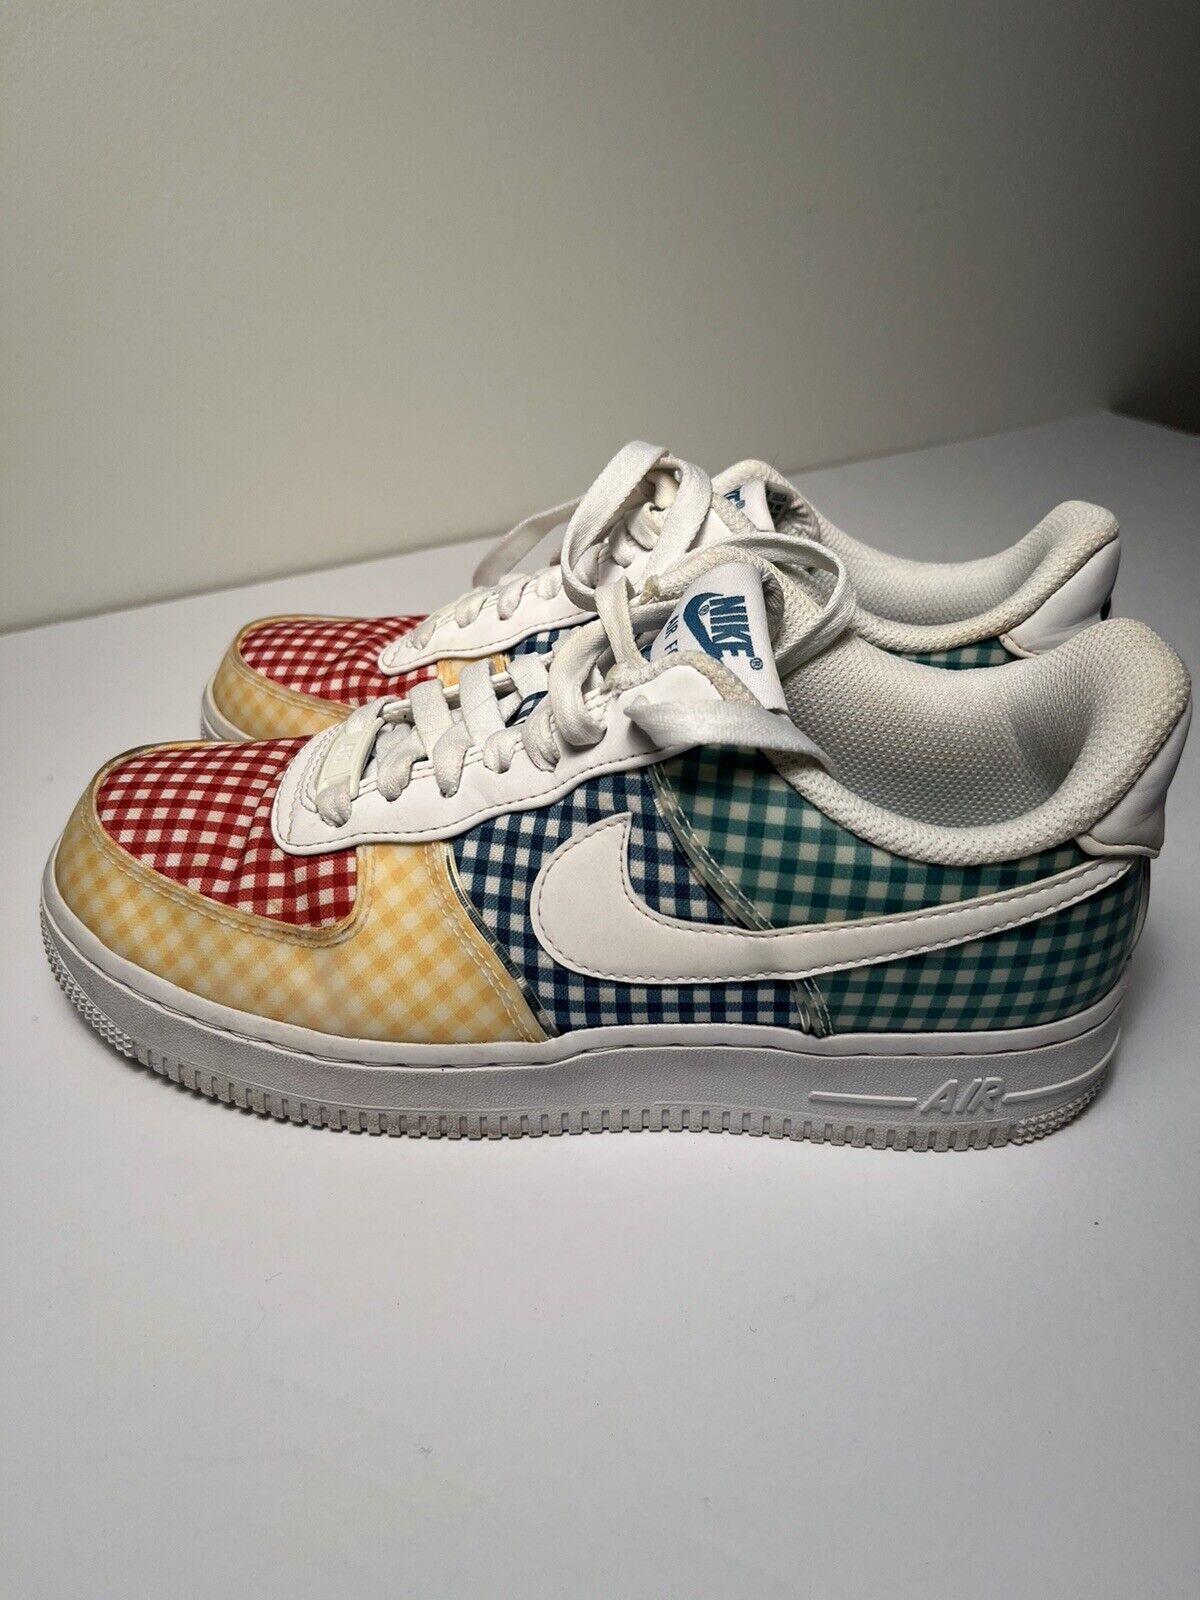 Nike Wmns Force 1 Low QS Pack Multicolor BV4891-100 Size 7 | eBay